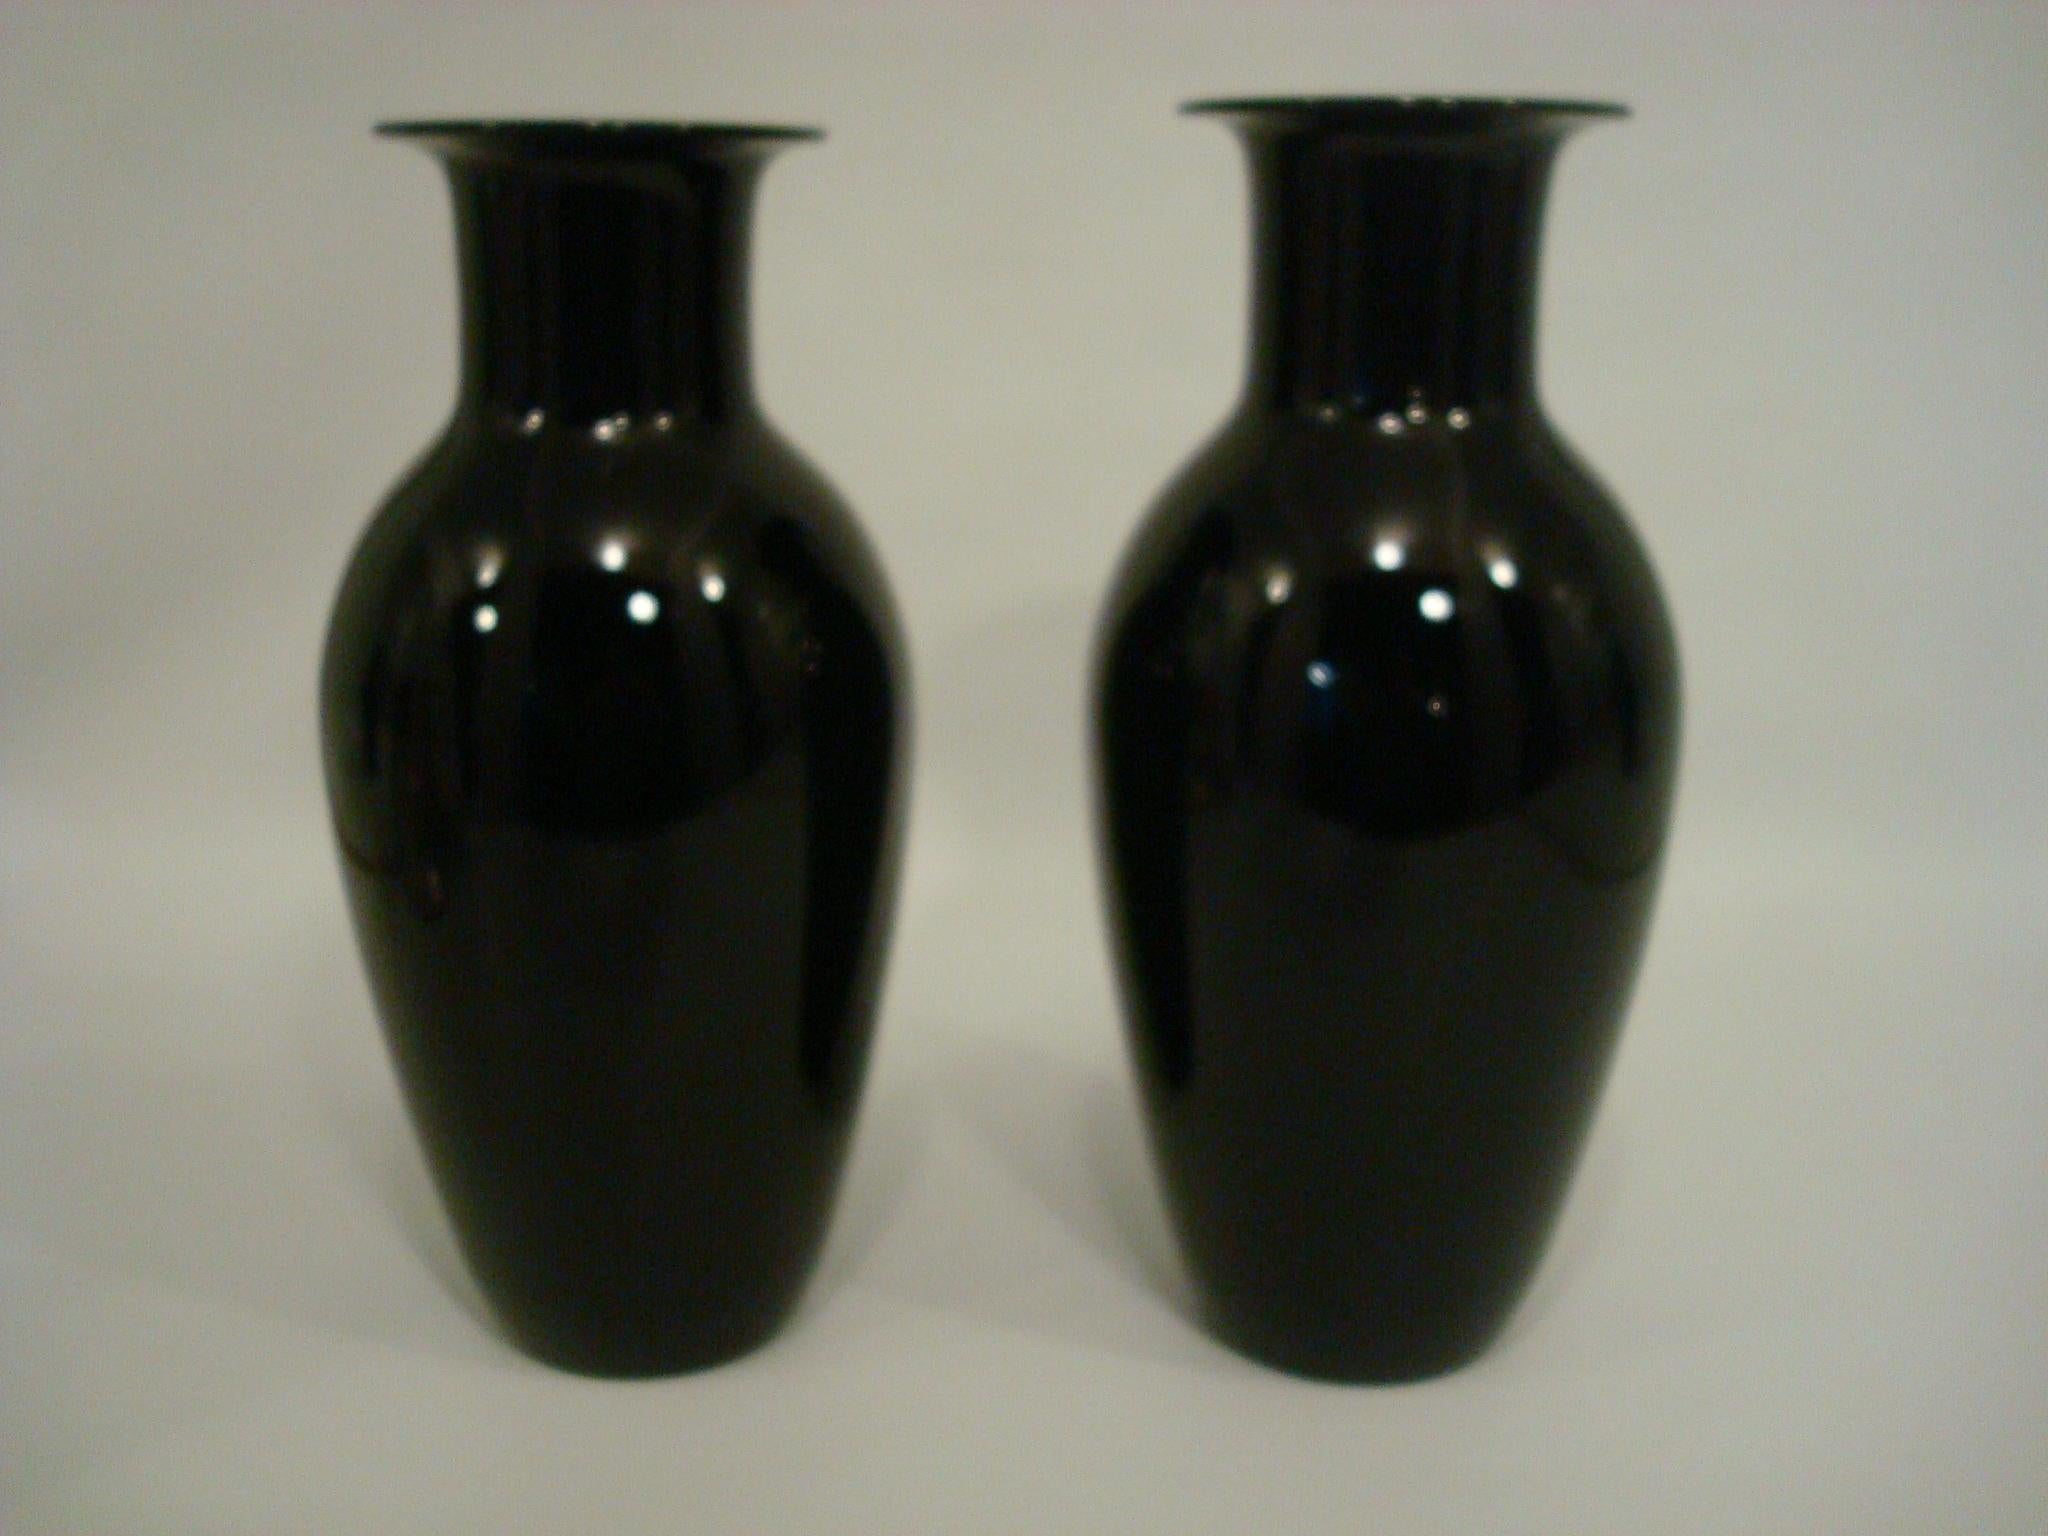 Murano Glass Pair of Large Black Murano Vases by Barovier e Toso, Italy, 1970s For Sale